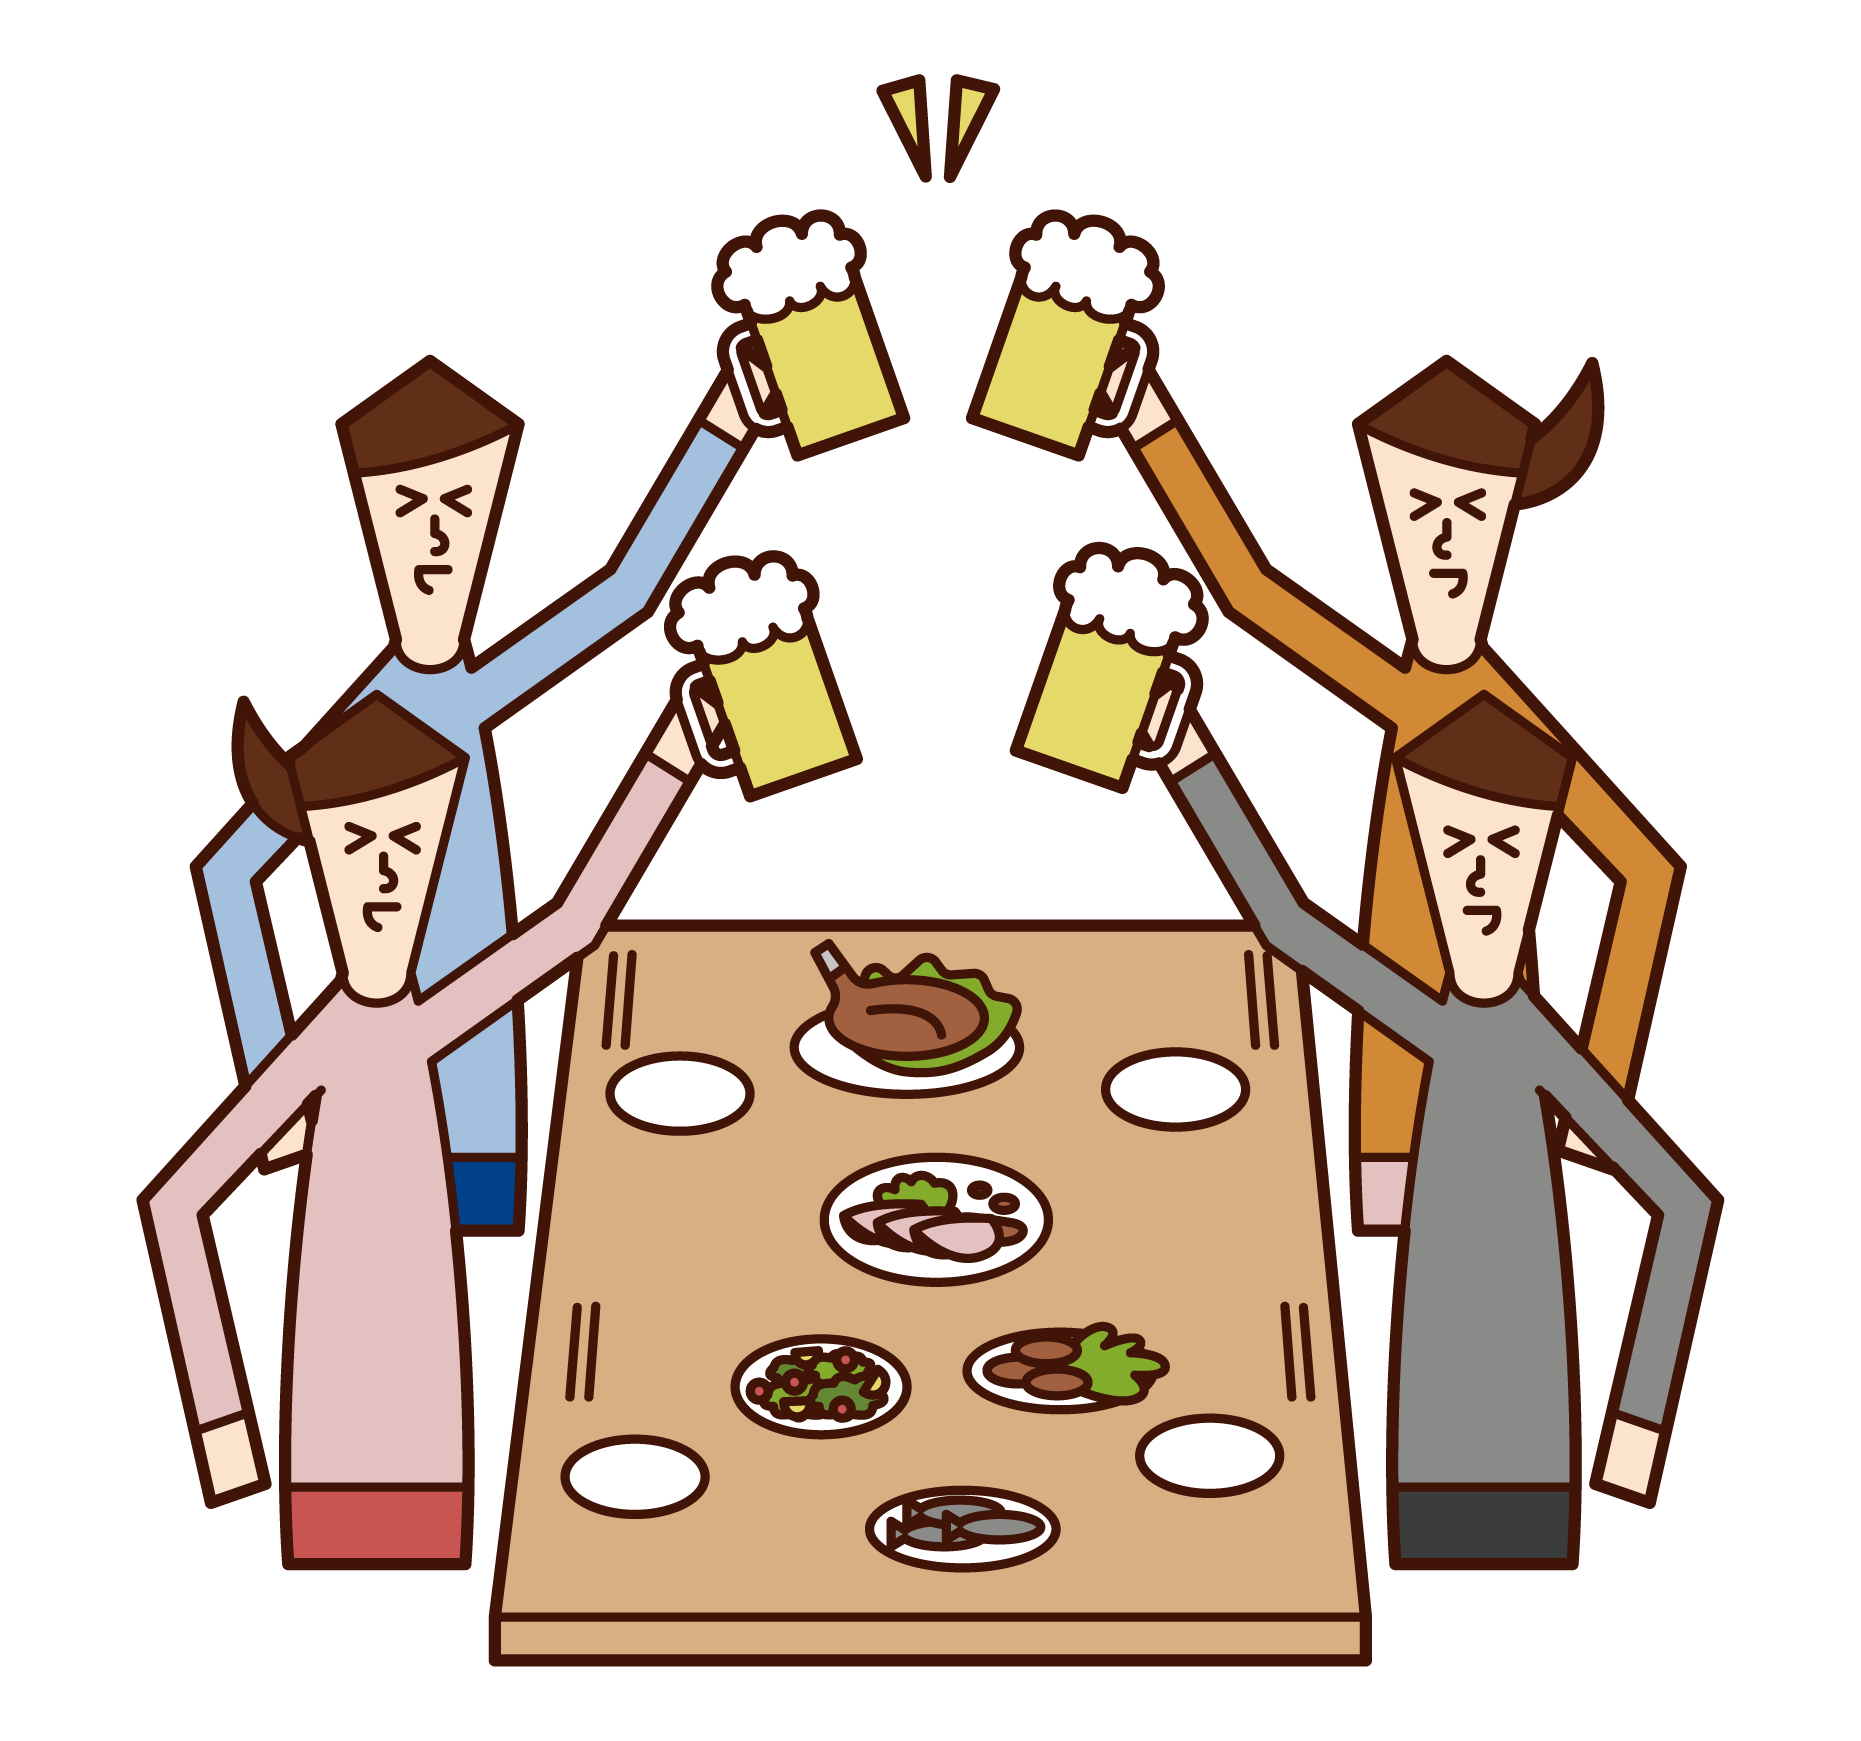 Illustration of people (men and women) toasting at a drinking party